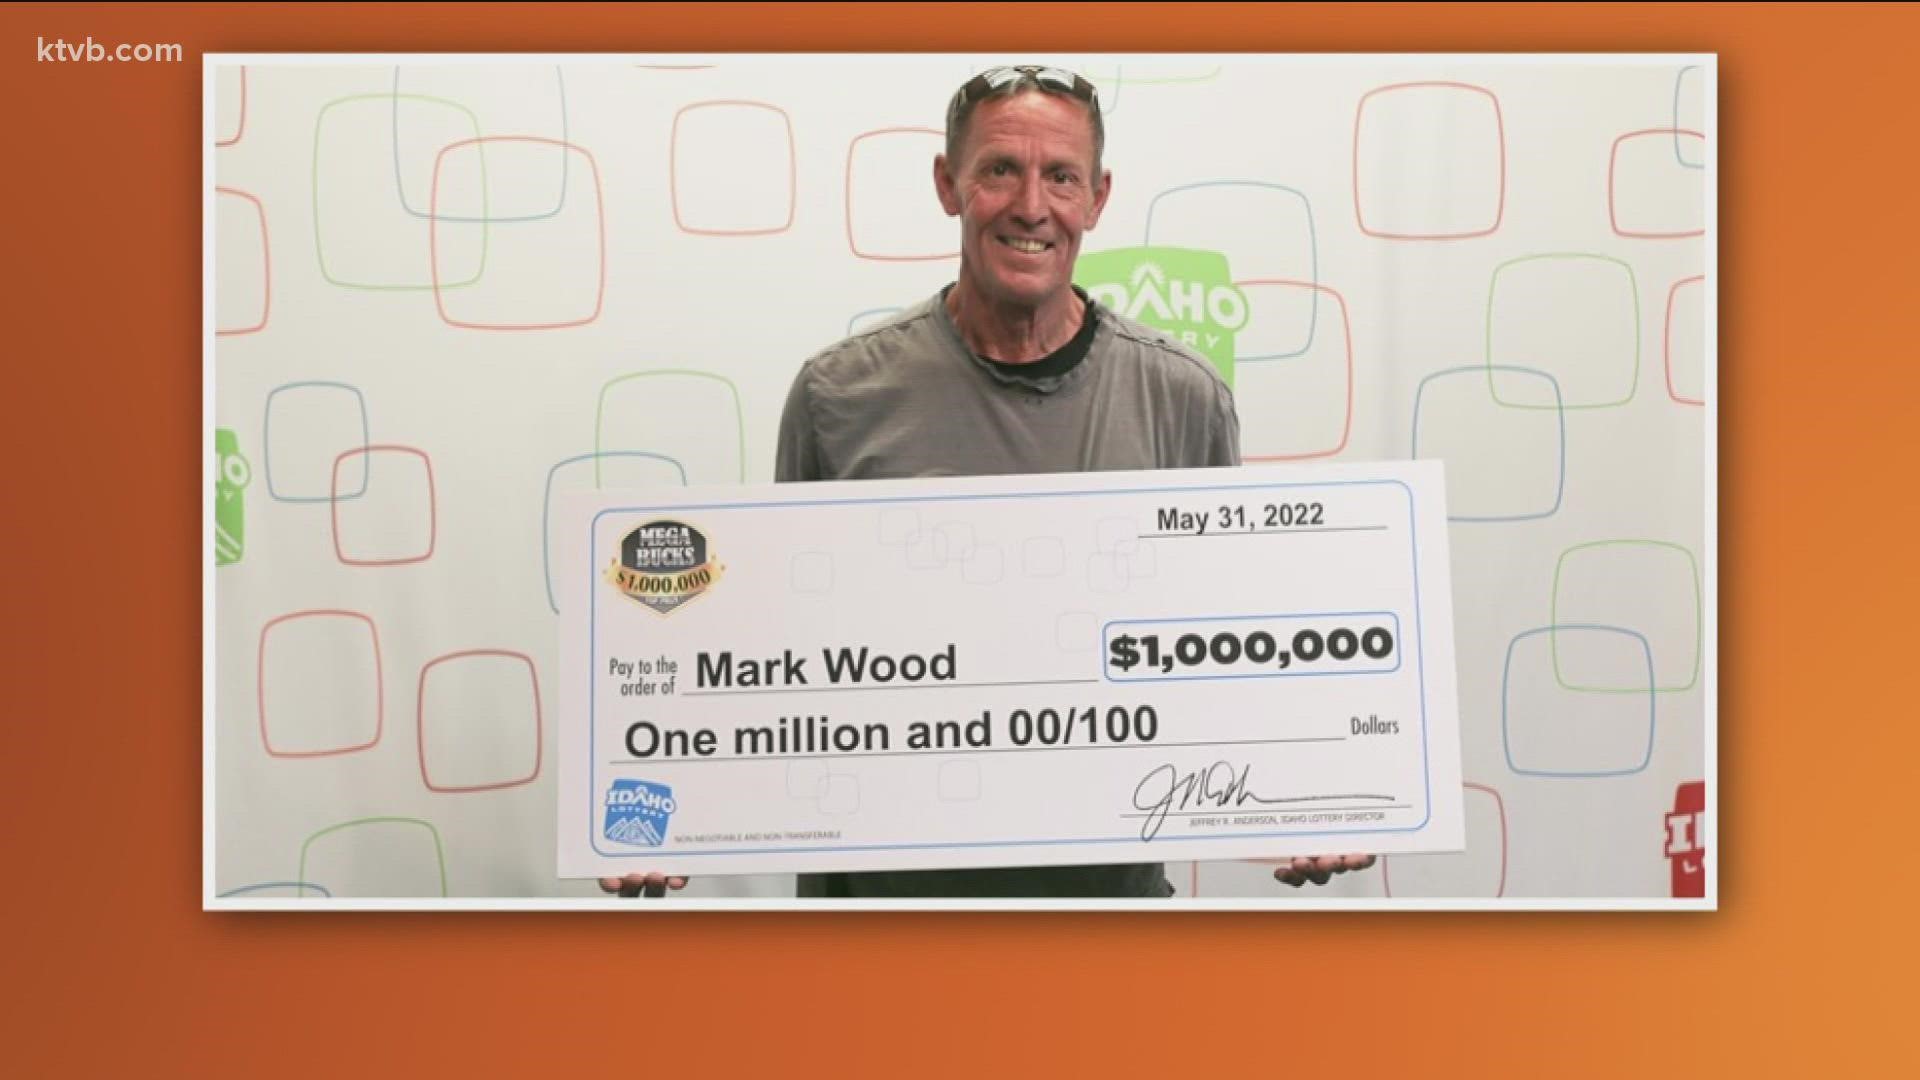 Idaho Lottery announced a man from Nampa won the first million-dollar top prize from the Mega Bucks scratch game.